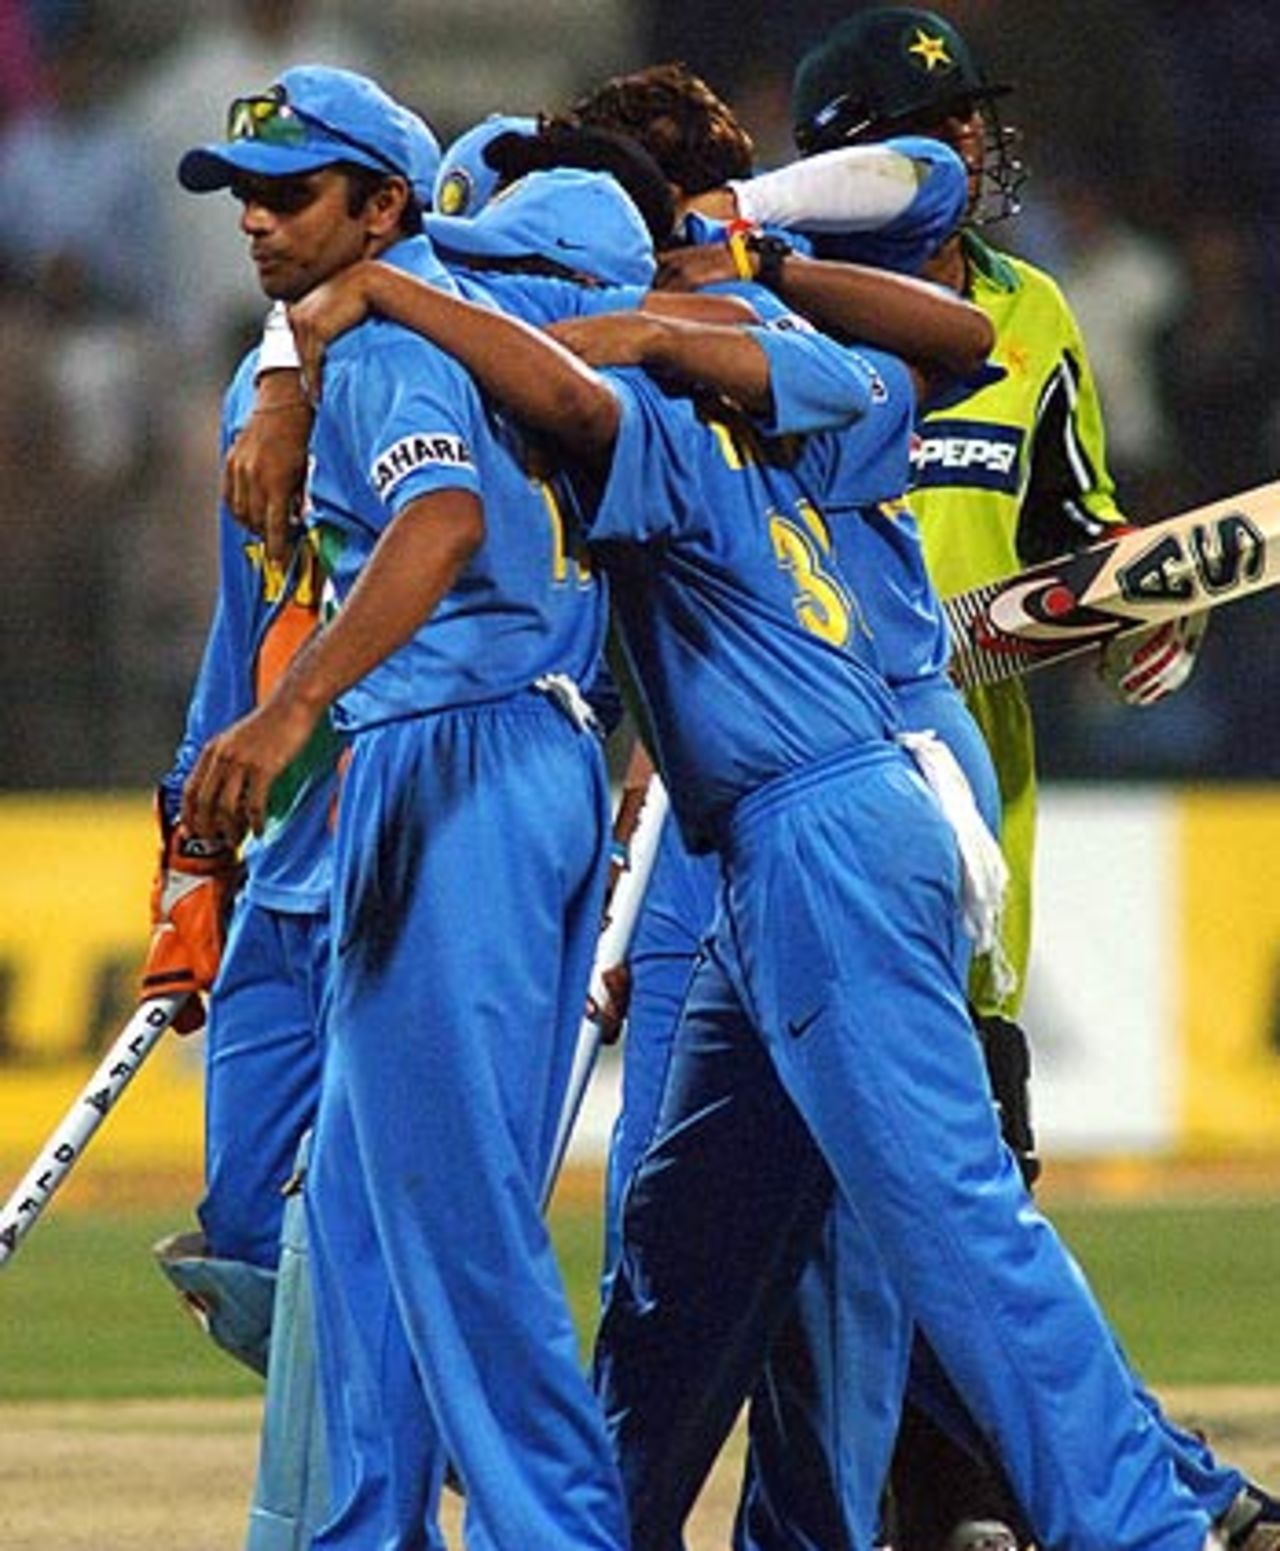 Rahul Dravid gathers his mates at the fall of the last wicket, India v Pakistan, 2nd ODI, DLF Cup, Abu Dhabi, April 19, 2006